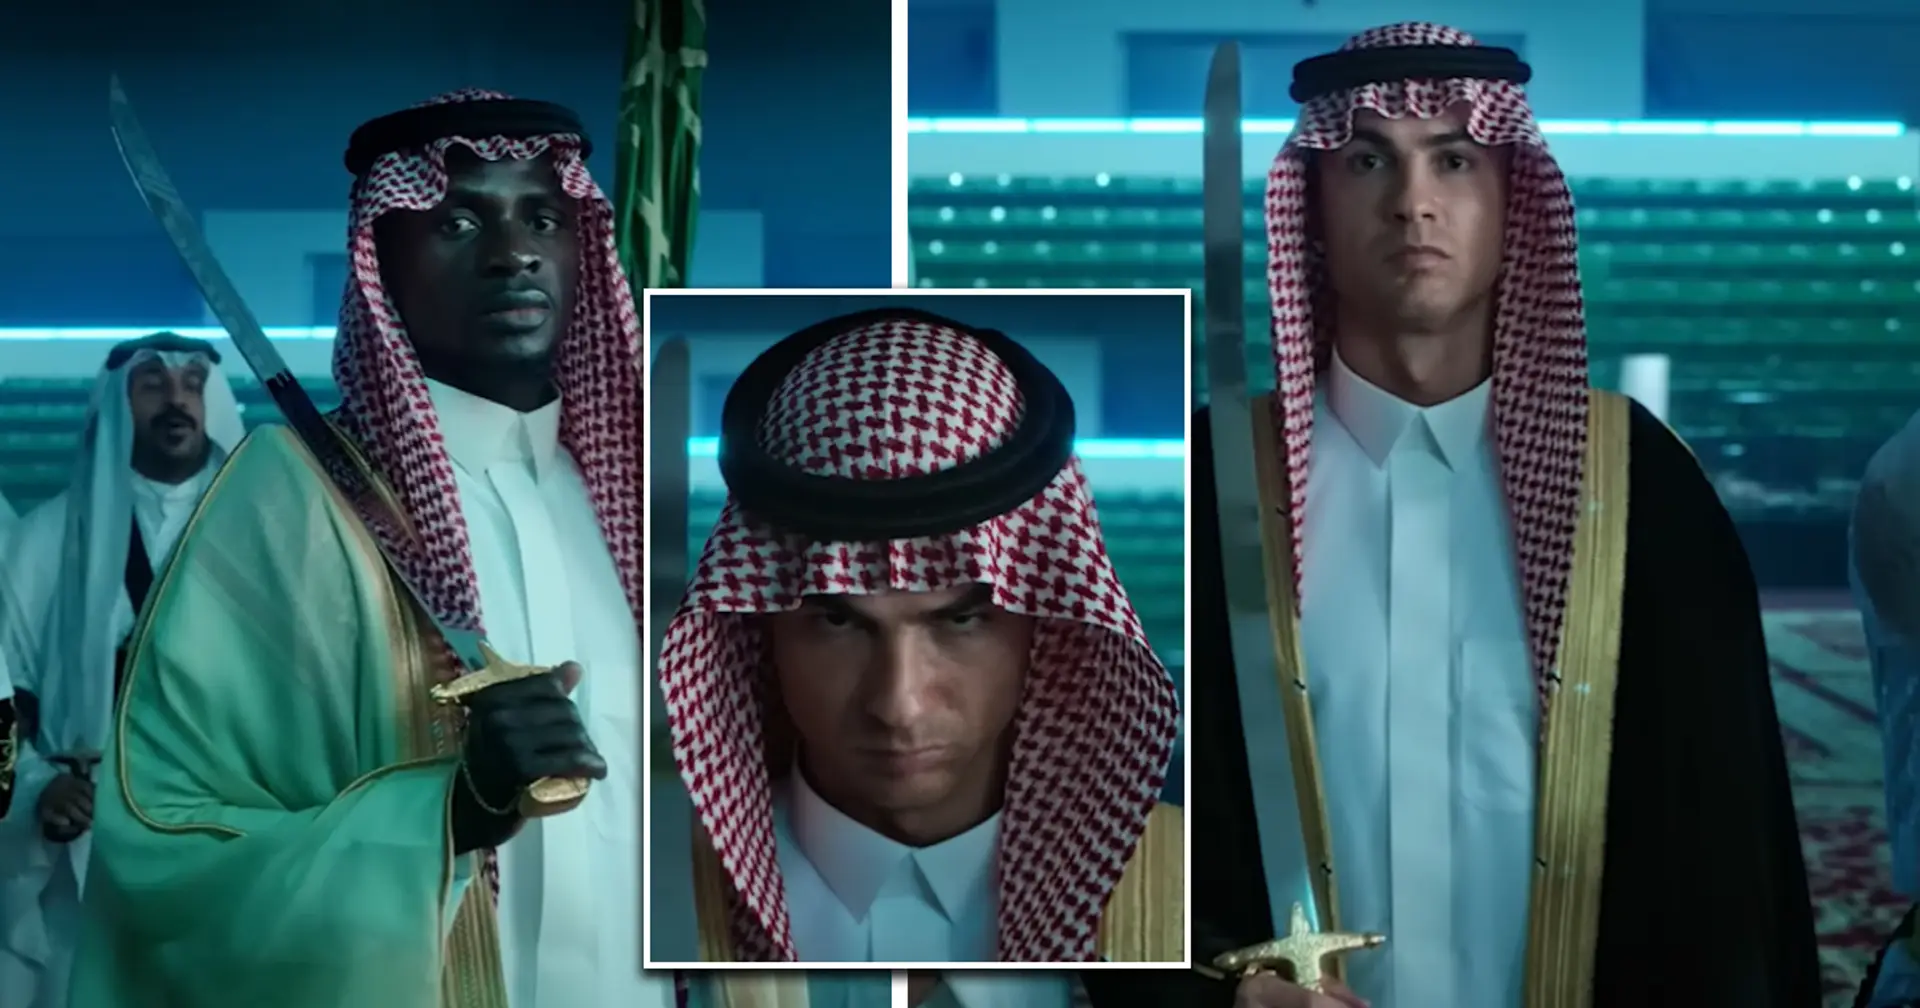 Al Nassr team embrace Saudi Culture wearing traditional dresses and swords in video